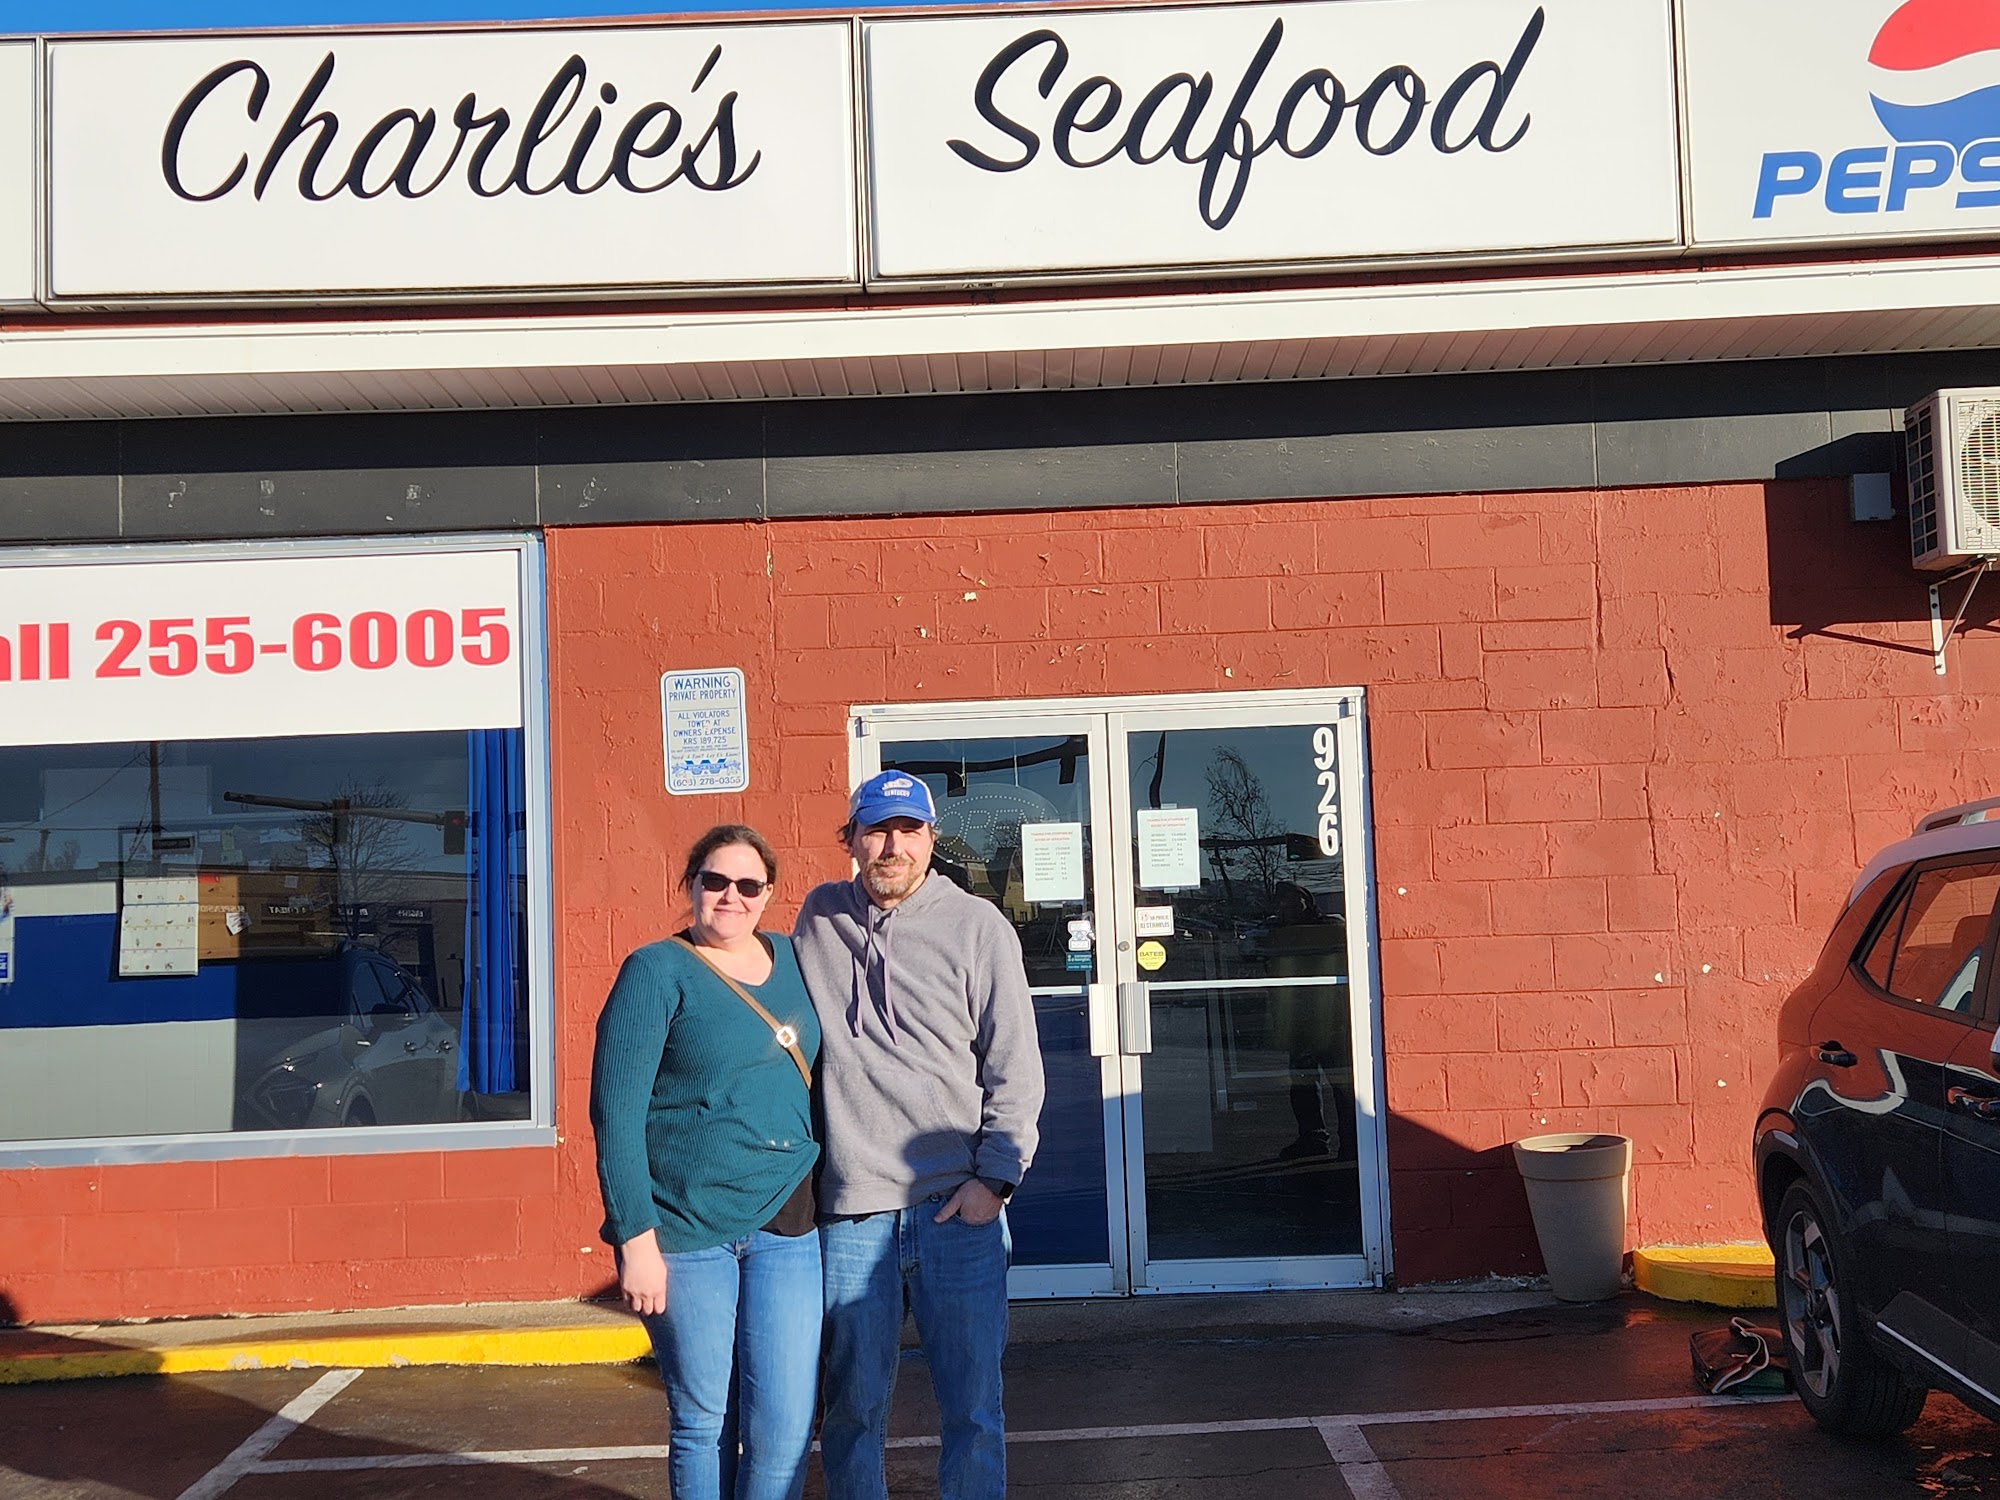 Charlie's Seafood & Carry-Out Restaurant